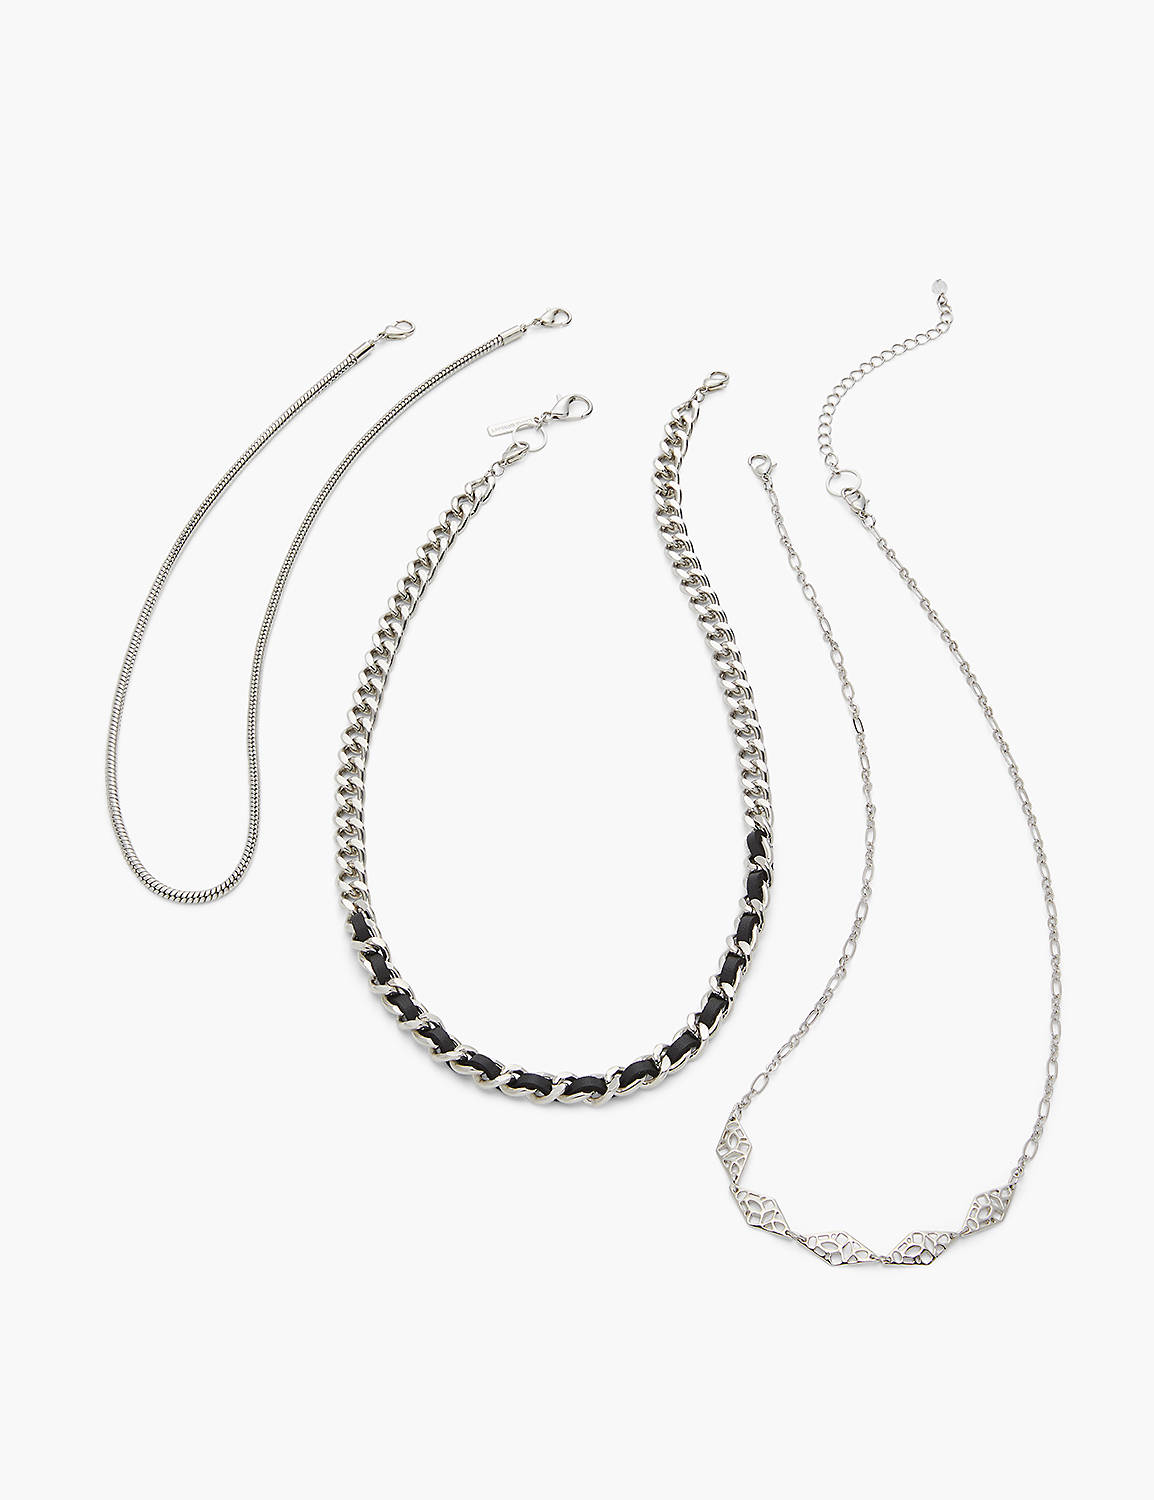 Multi-Strand Convertible Chain Necklace Product Image 2